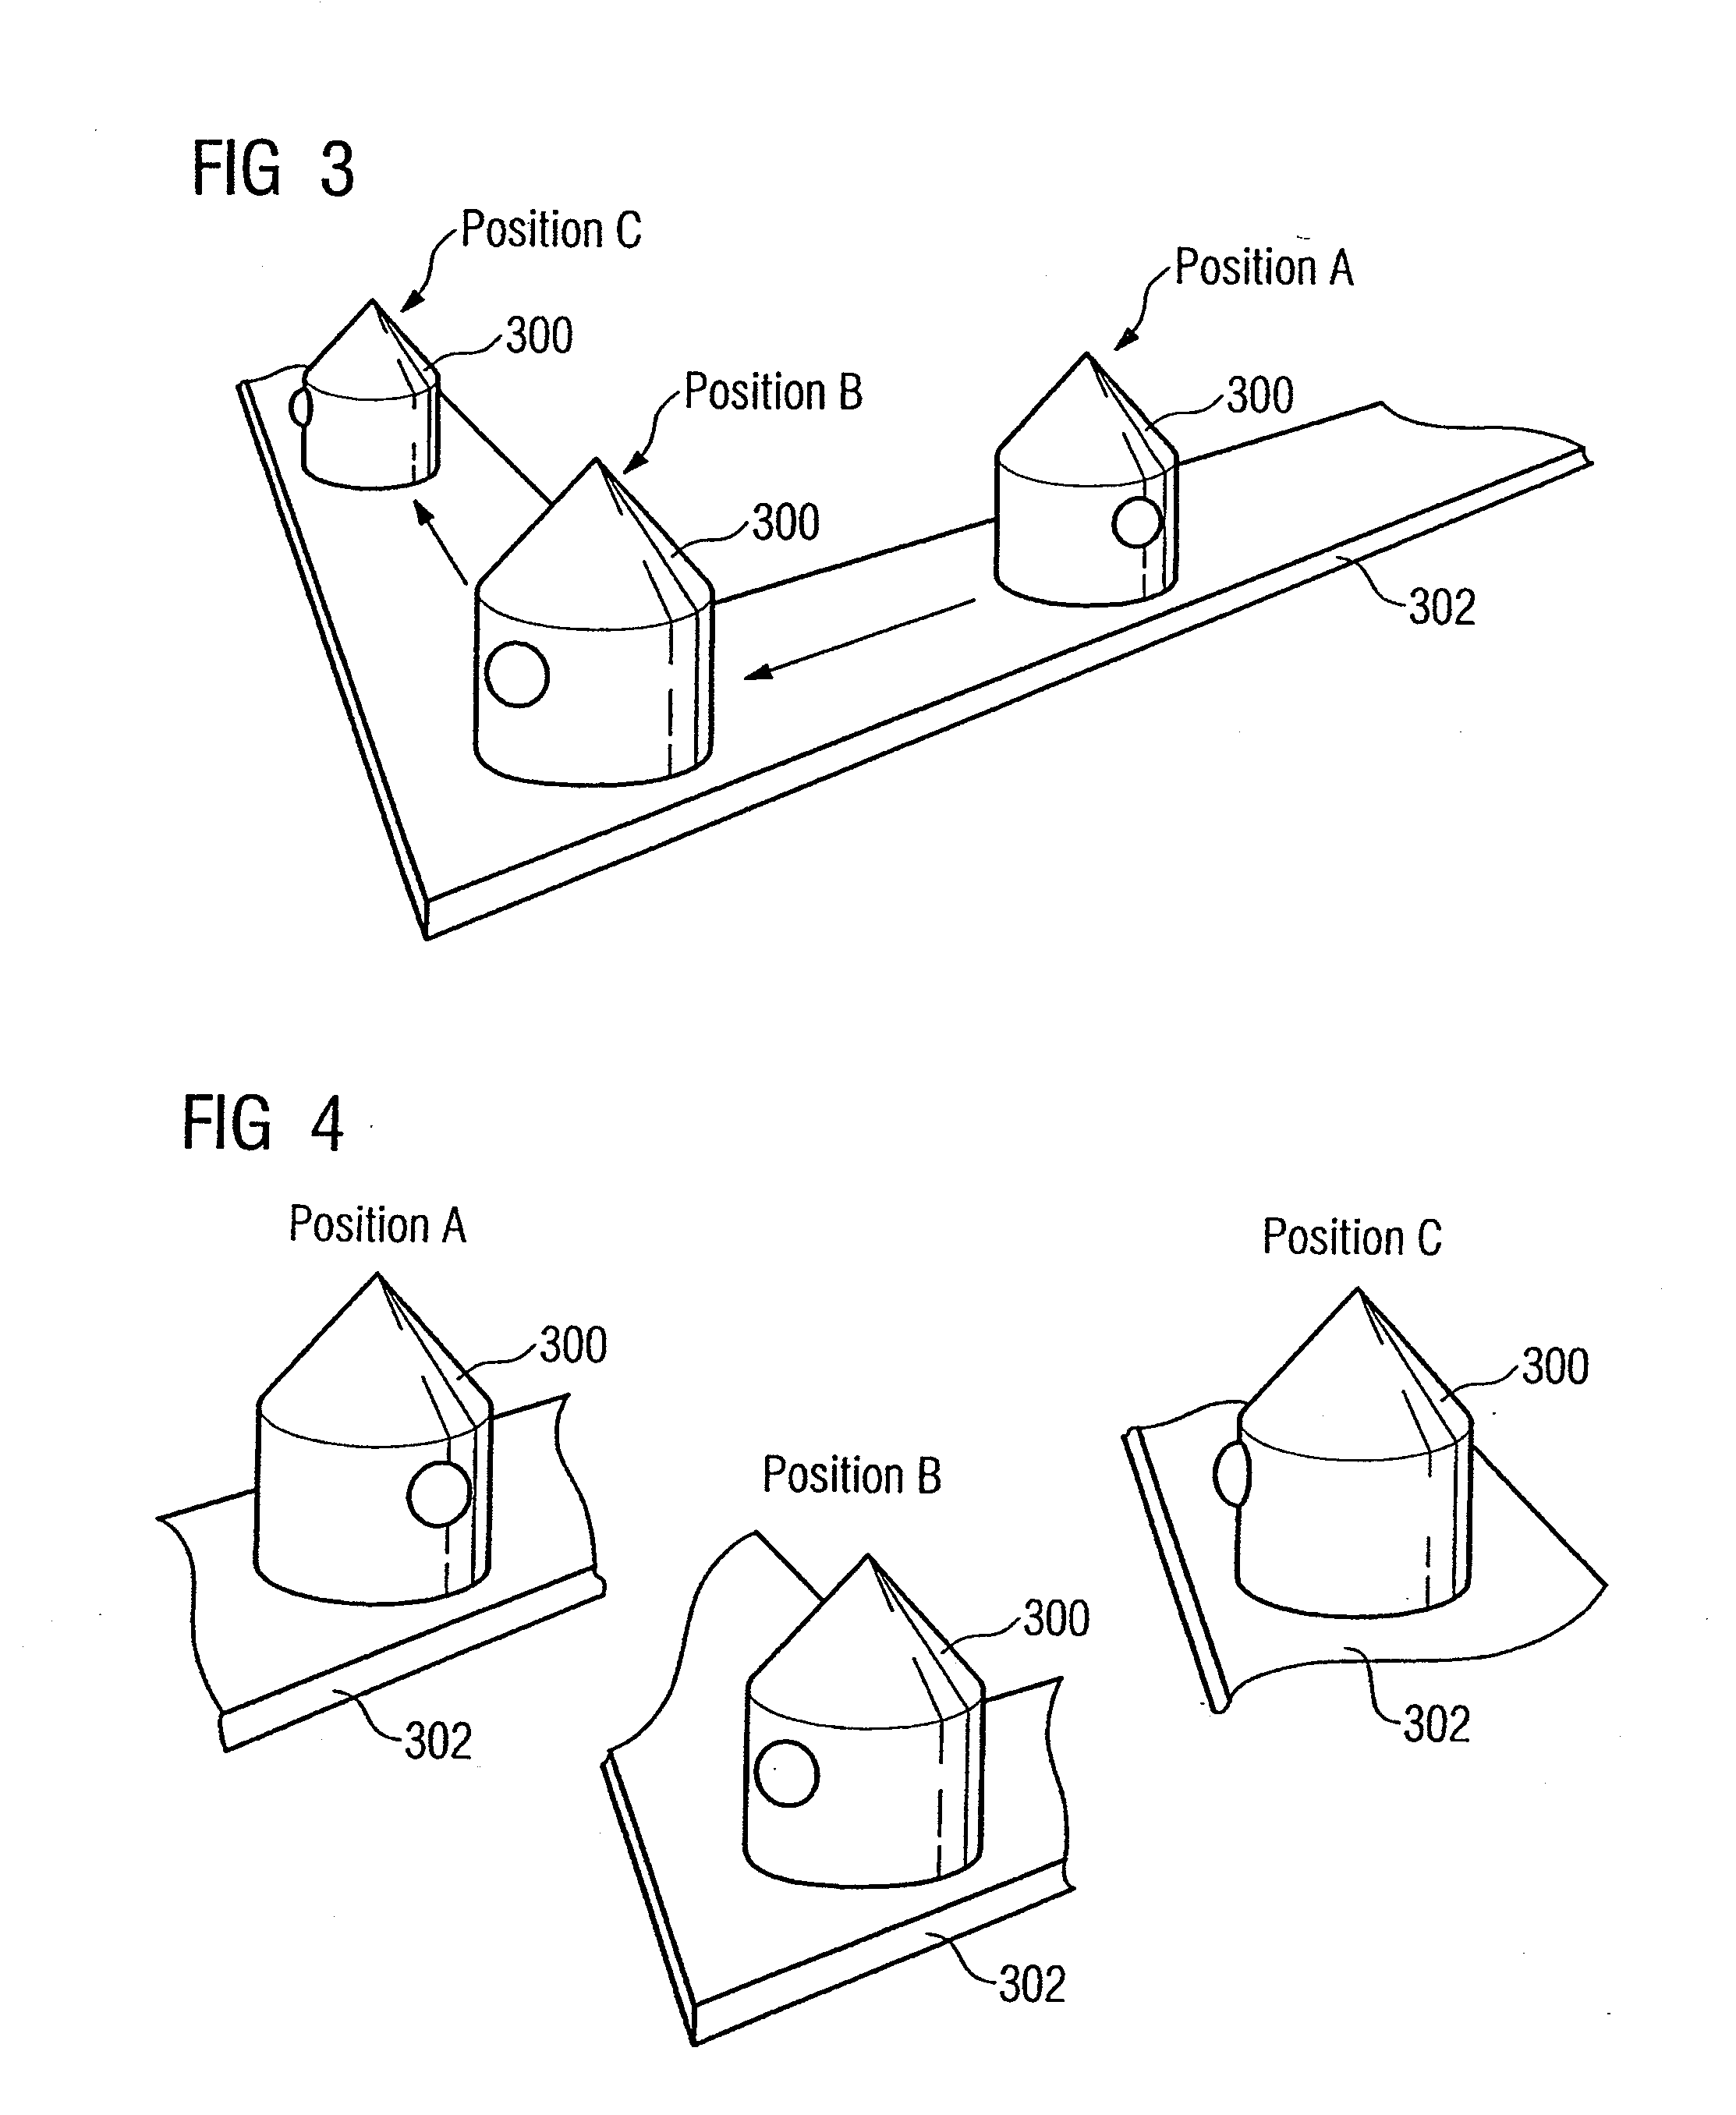 Method and Device for Visualizing an Installation of Automation Systems Together with a Workpiece